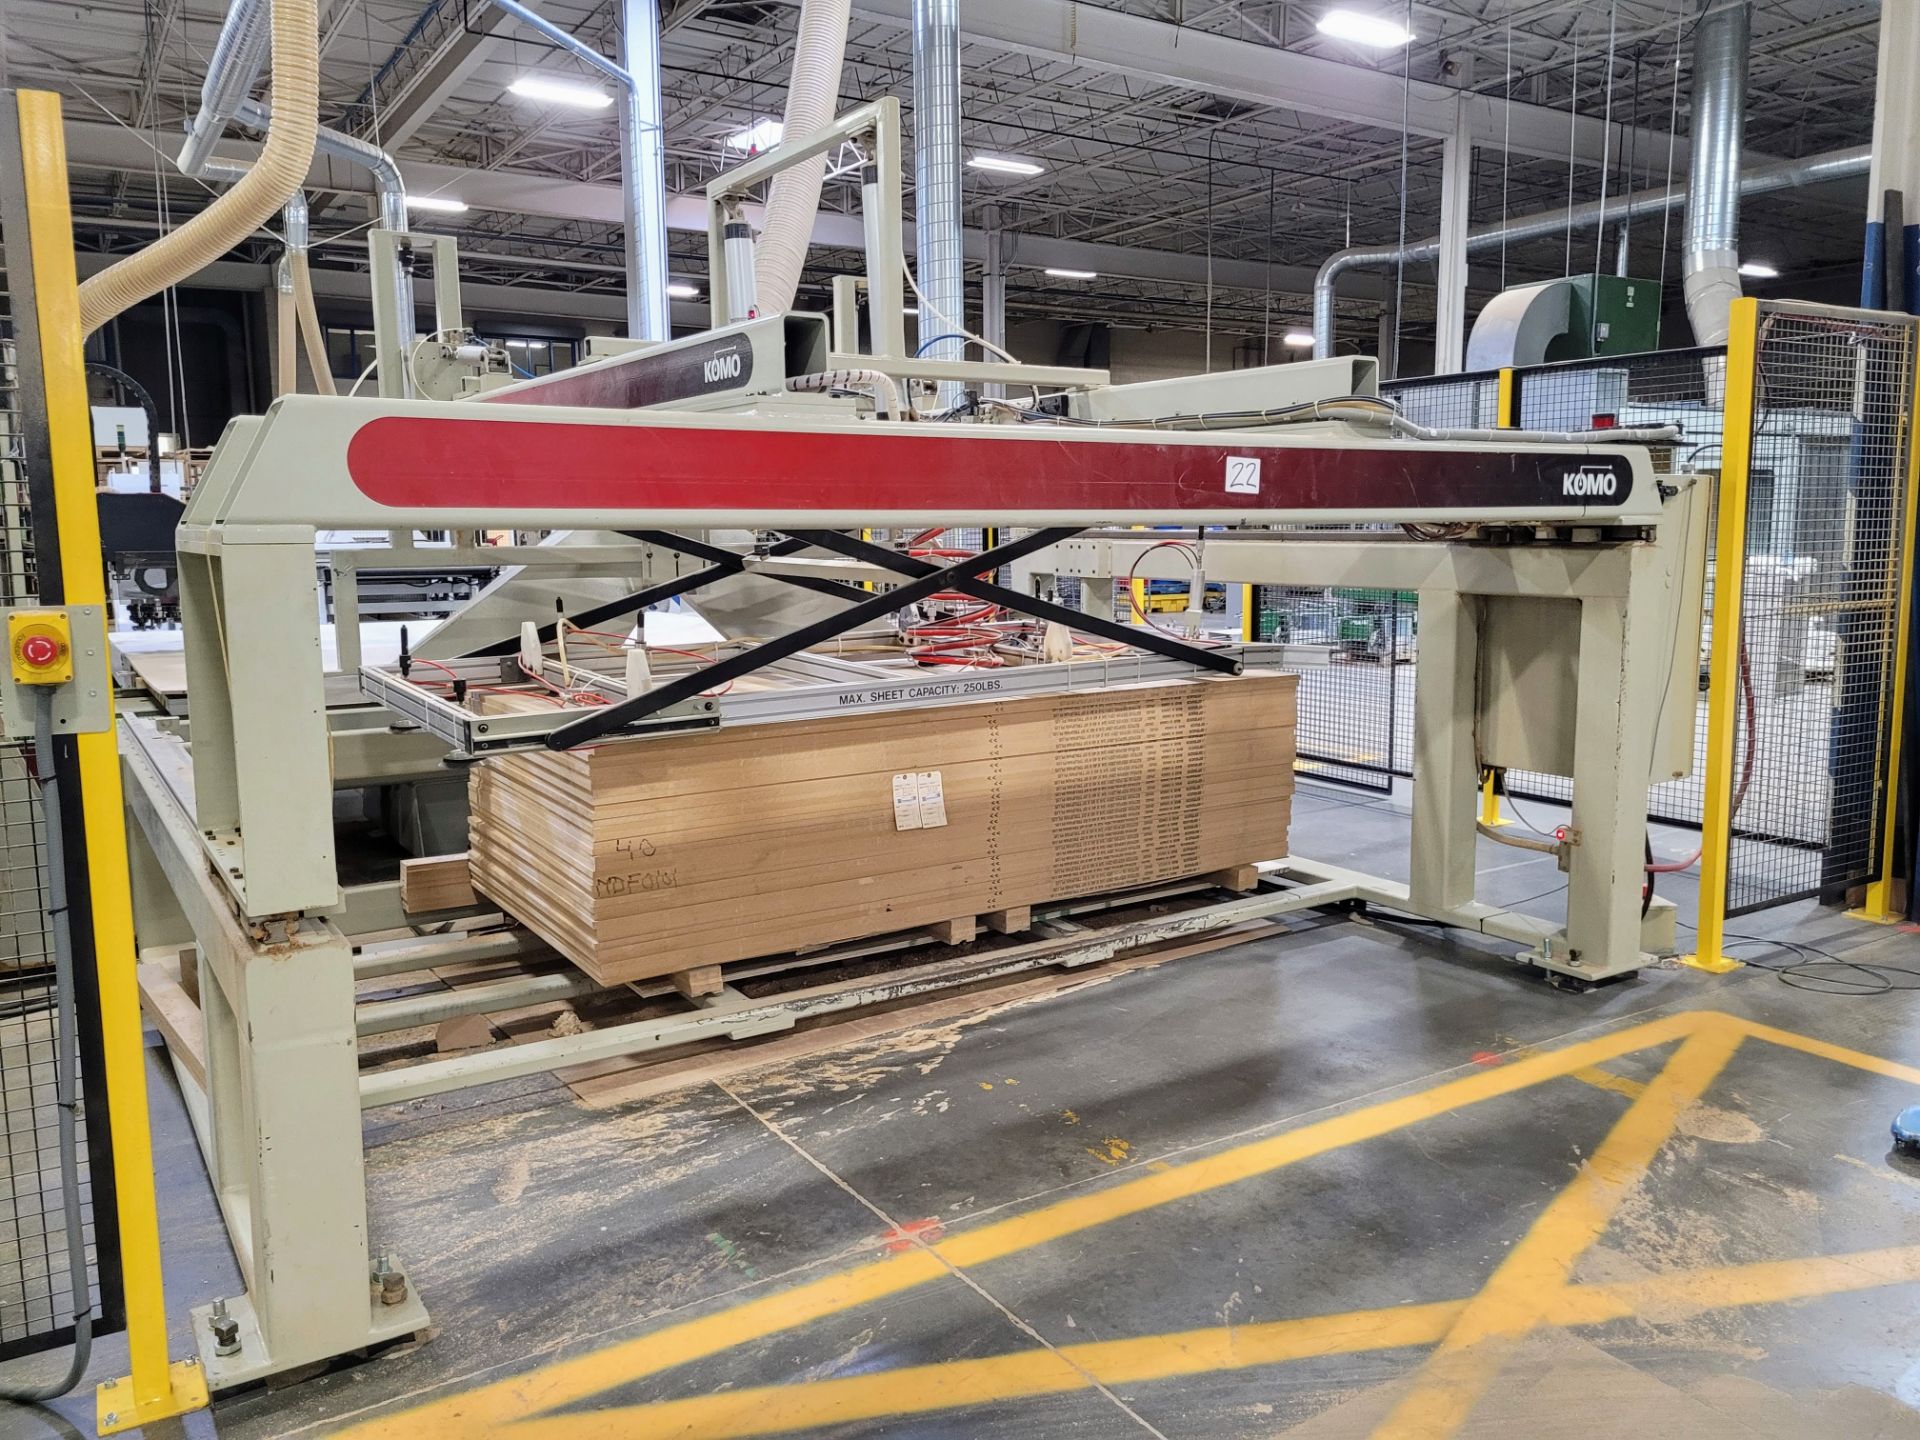 2006 KOMO VR510 MACHI II CNC ROUTER, 60" X 120" VACUUM TABLE, 16HP ATC VARIABLE SPEED SPINDLE, 10- - Image 3 of 12